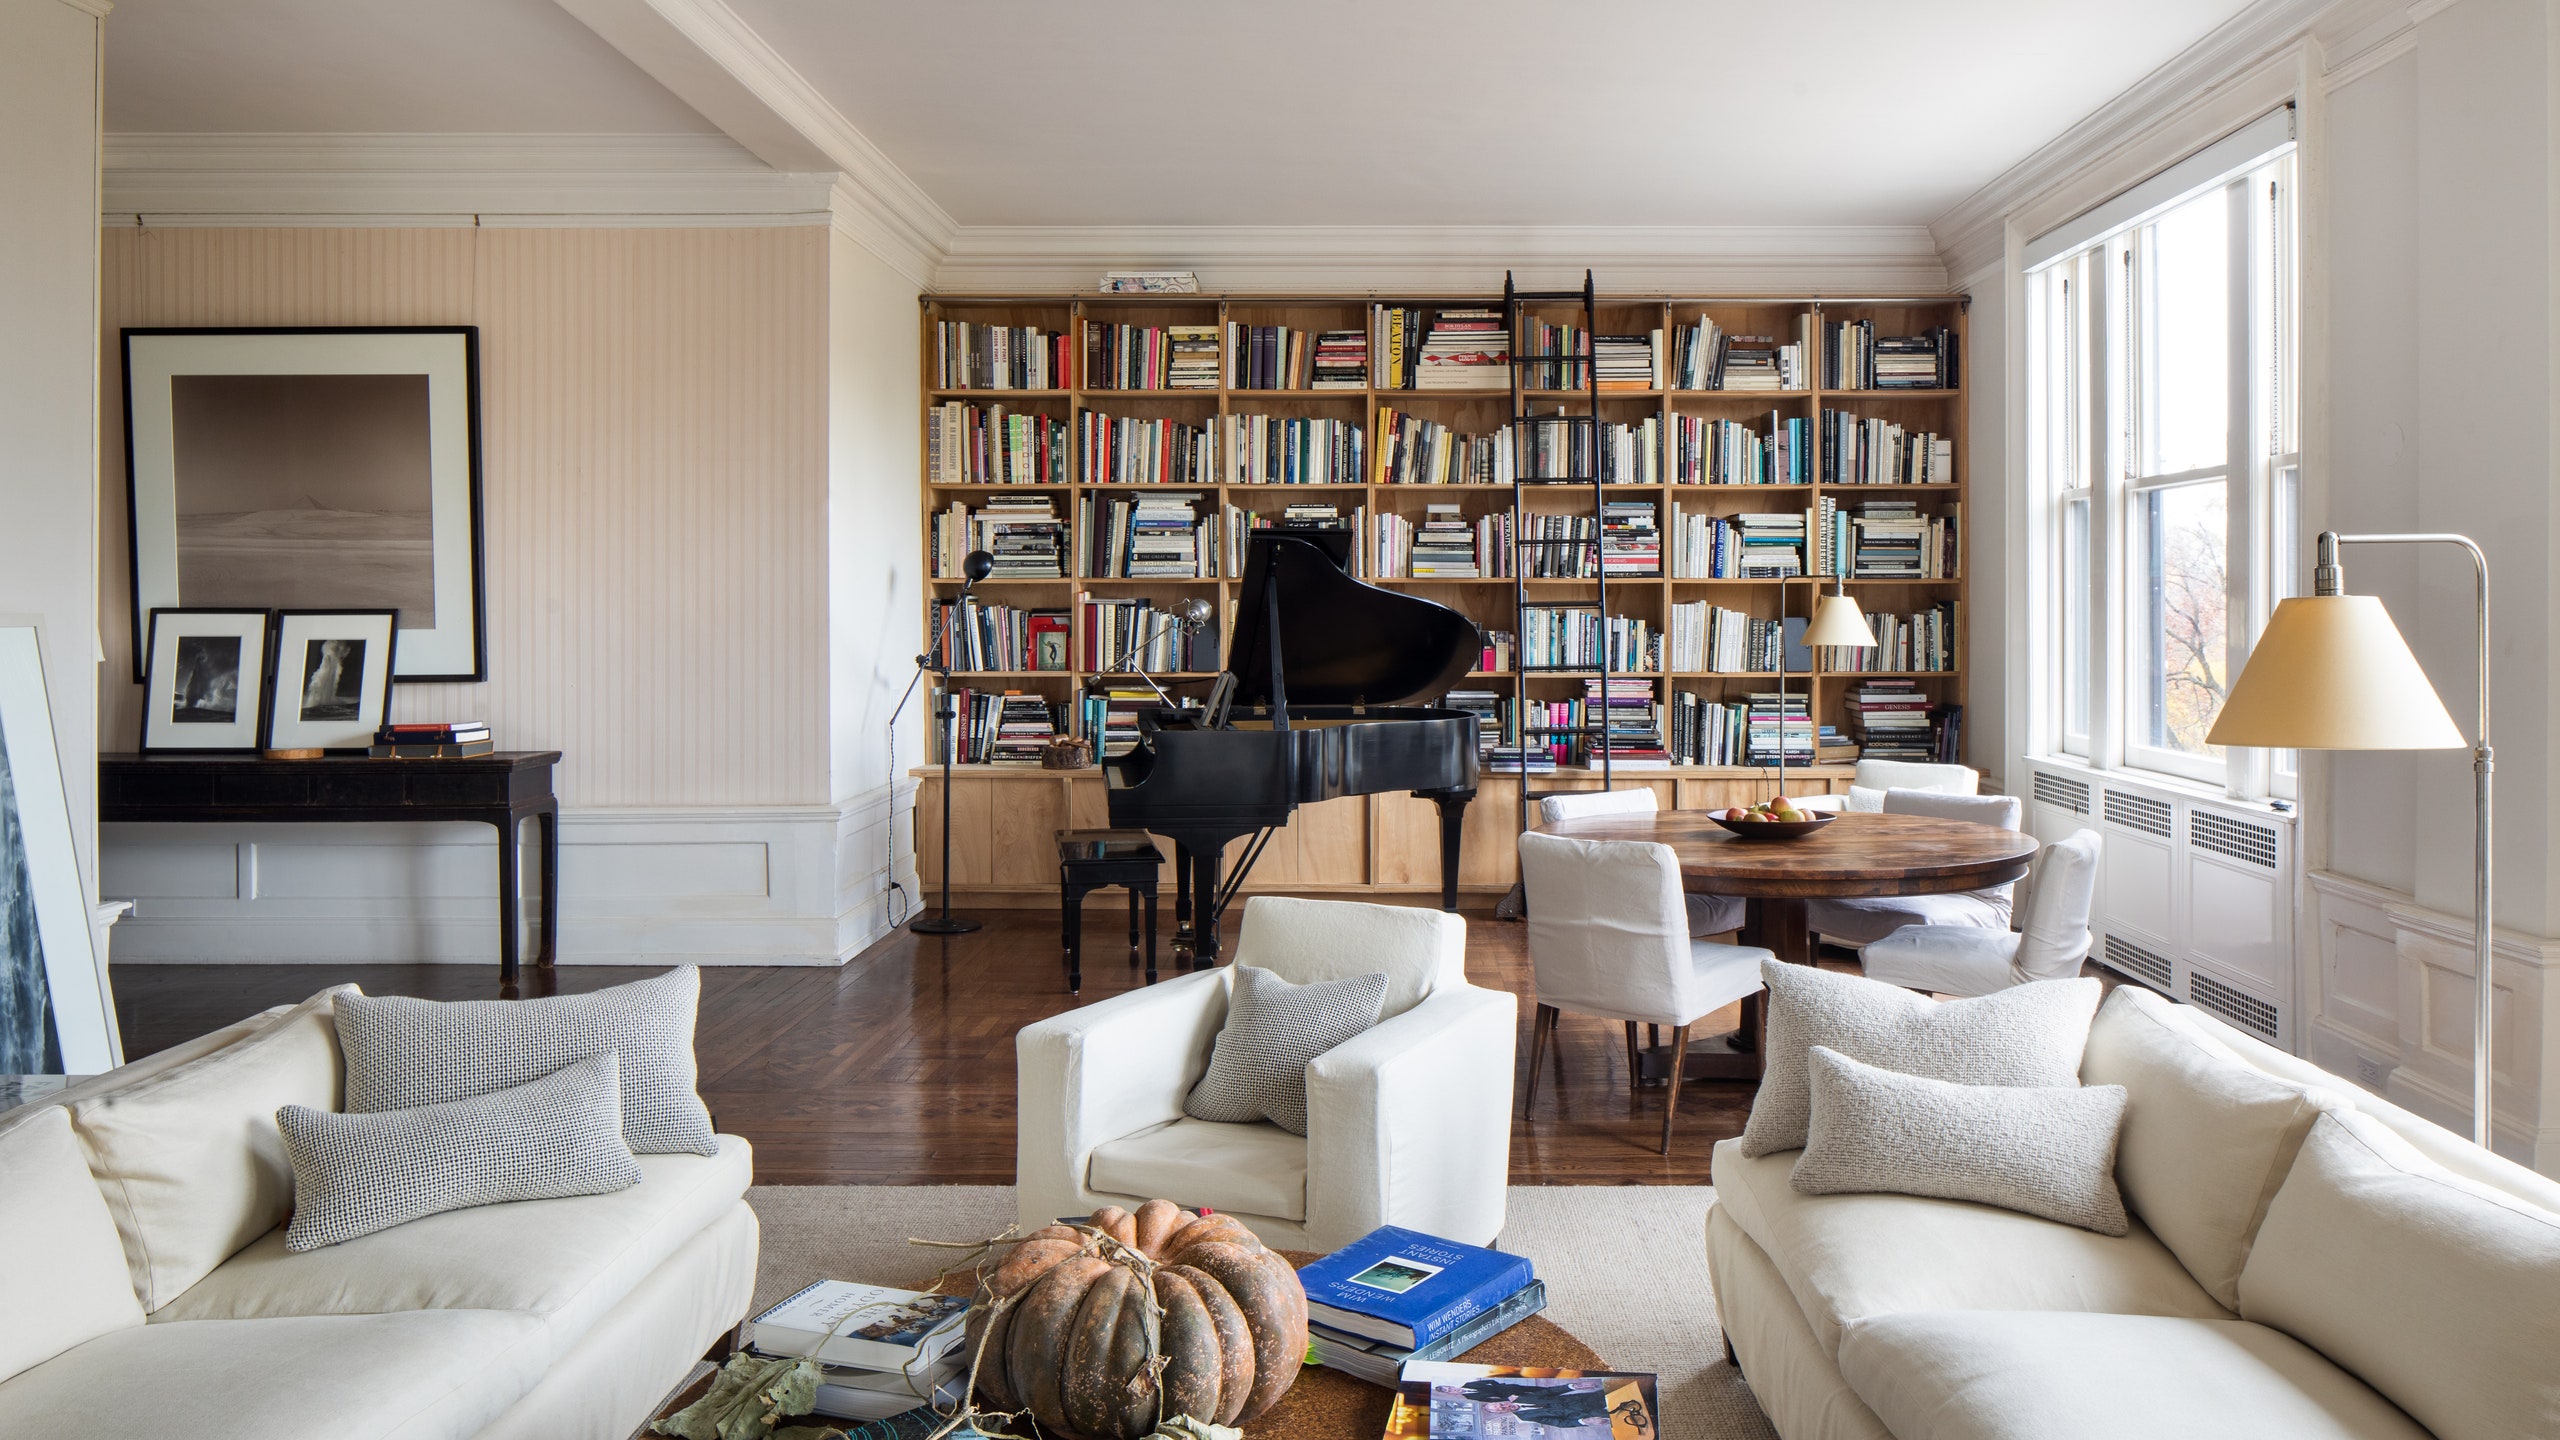 The main living space in Annie Leibovitzs Upper West Side home.